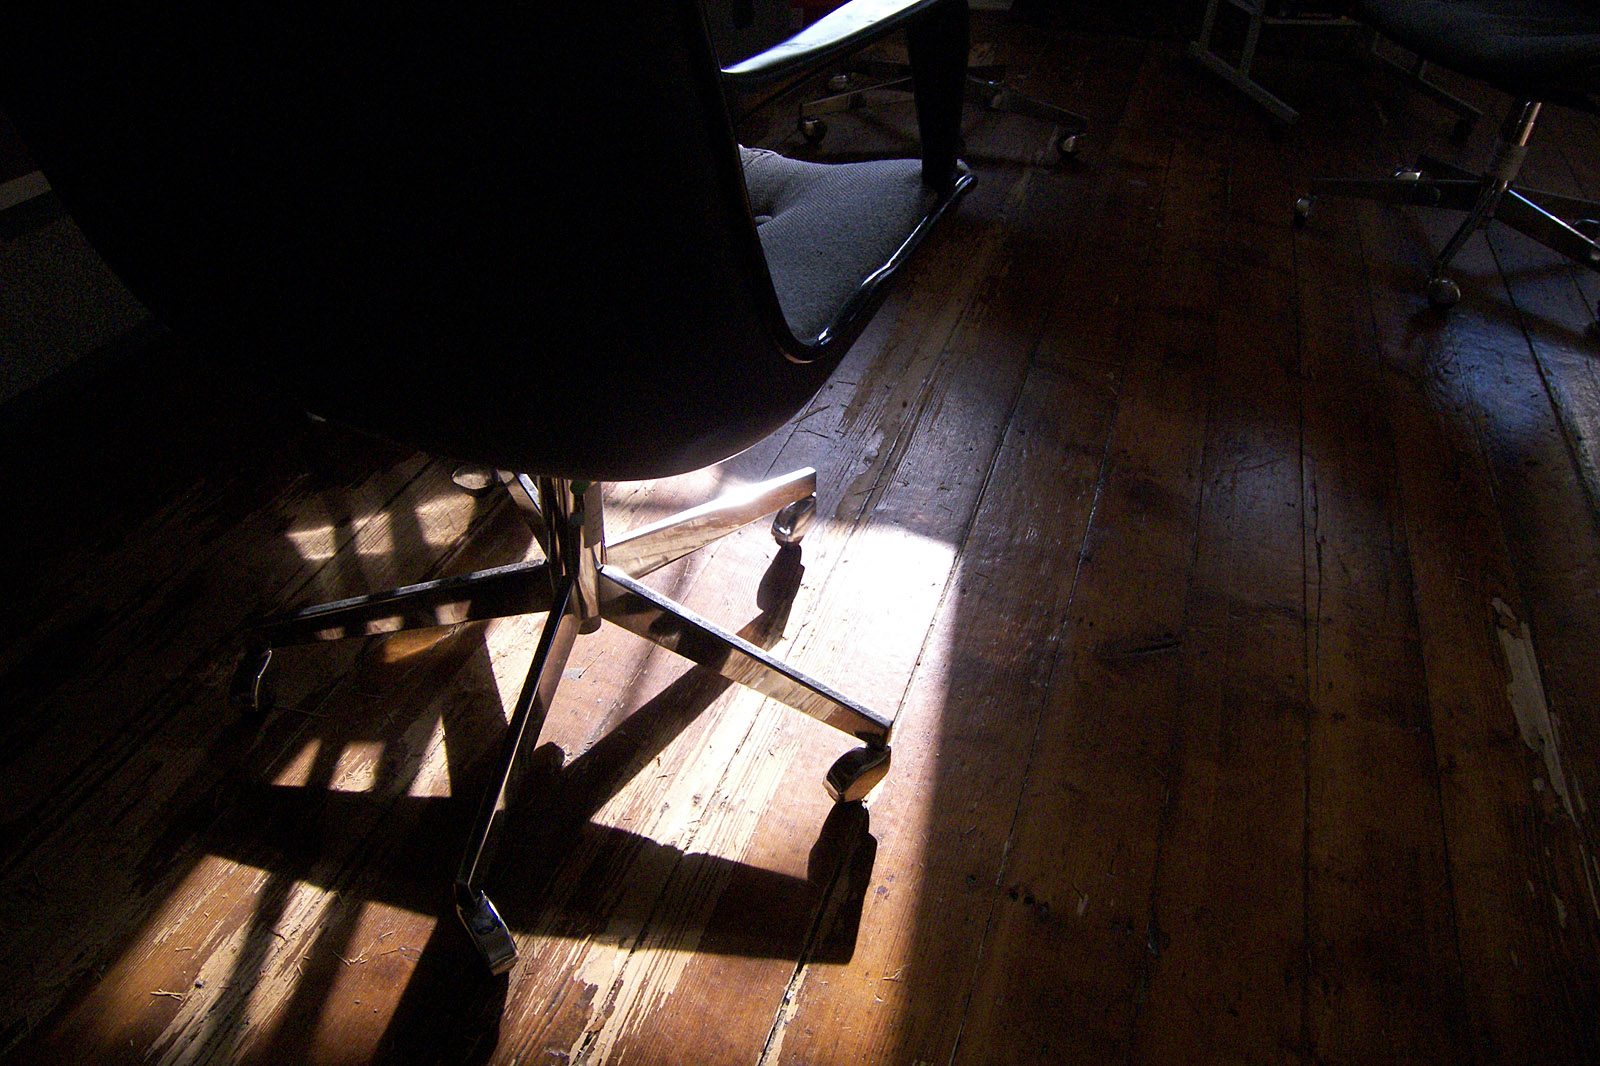 the sun is shining in the dark room with chairs